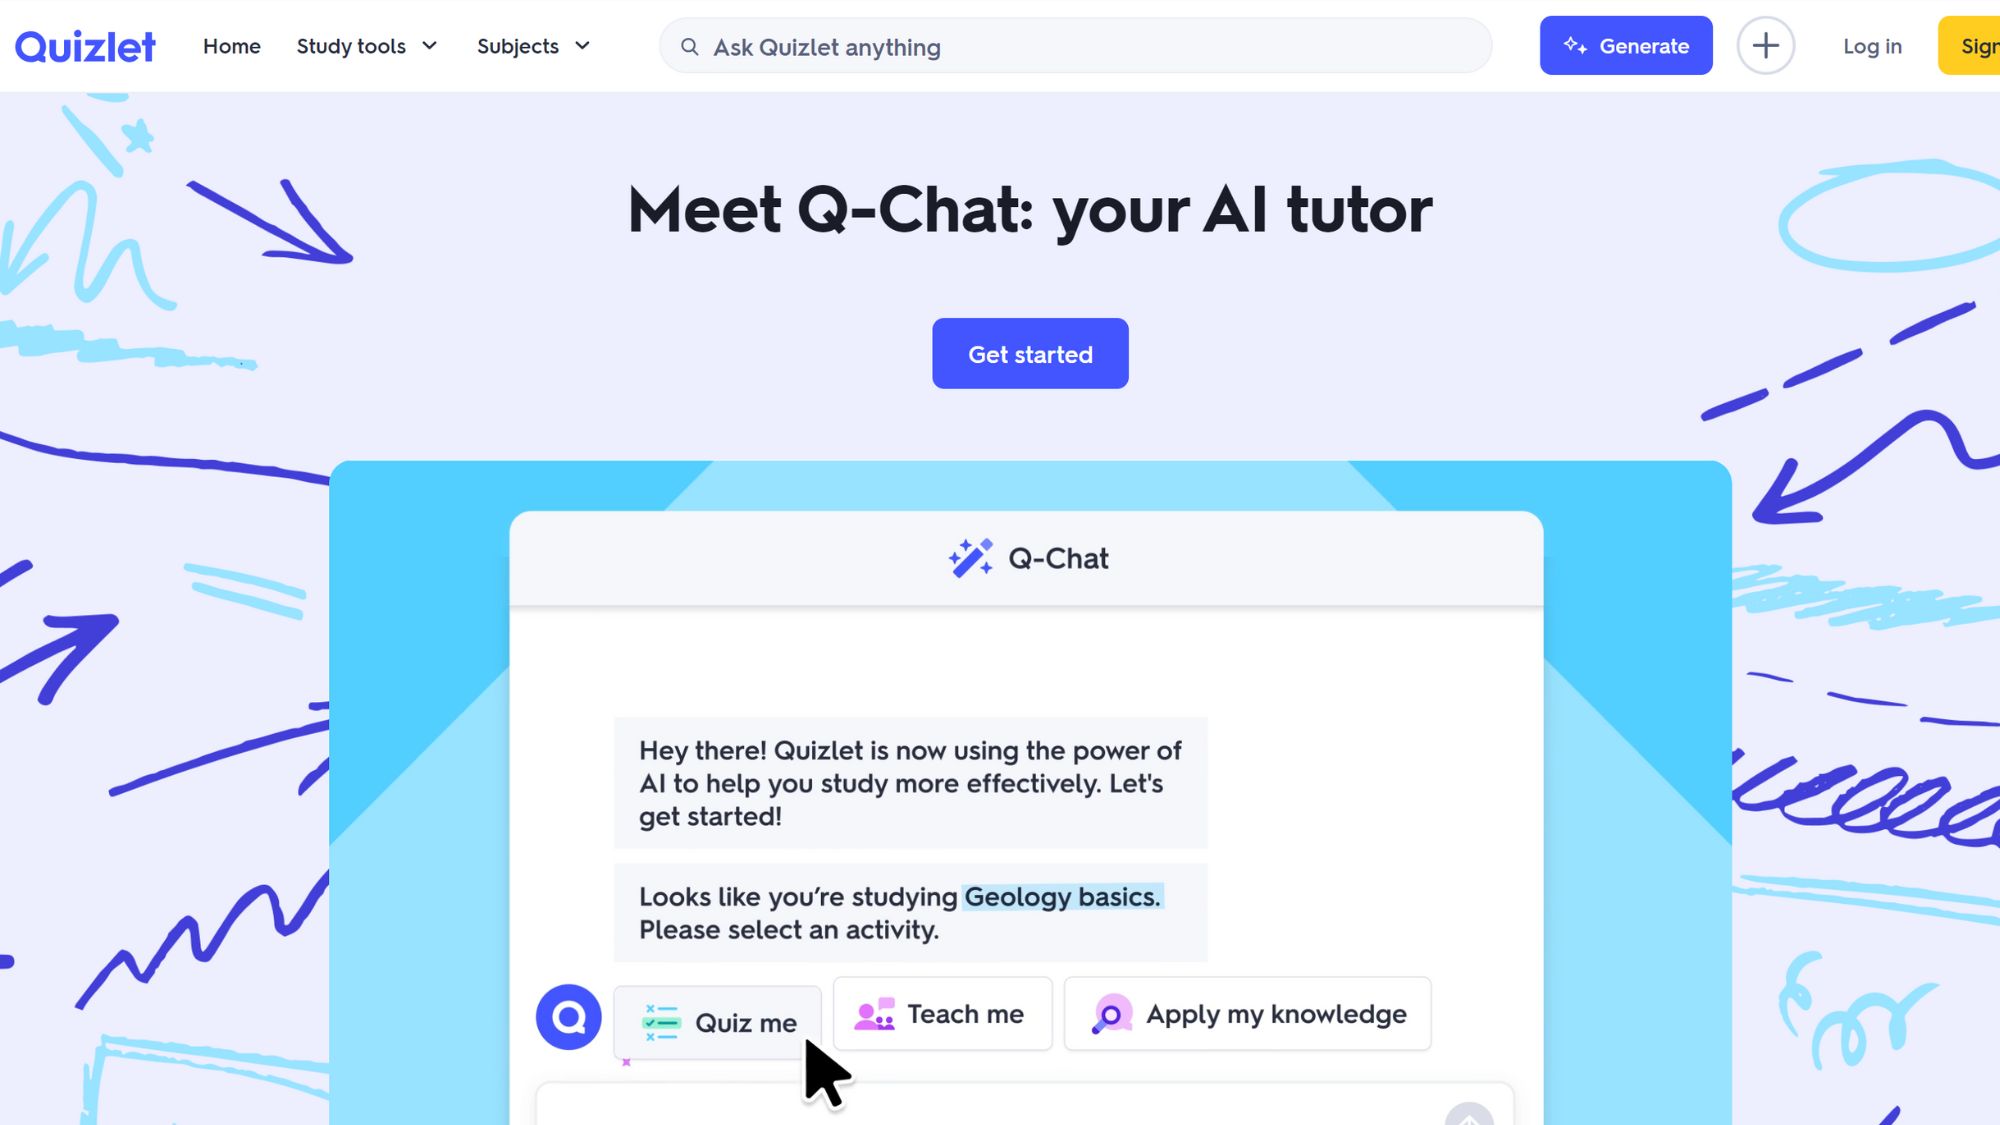 quizlet q-chat ai tool for students.jpg